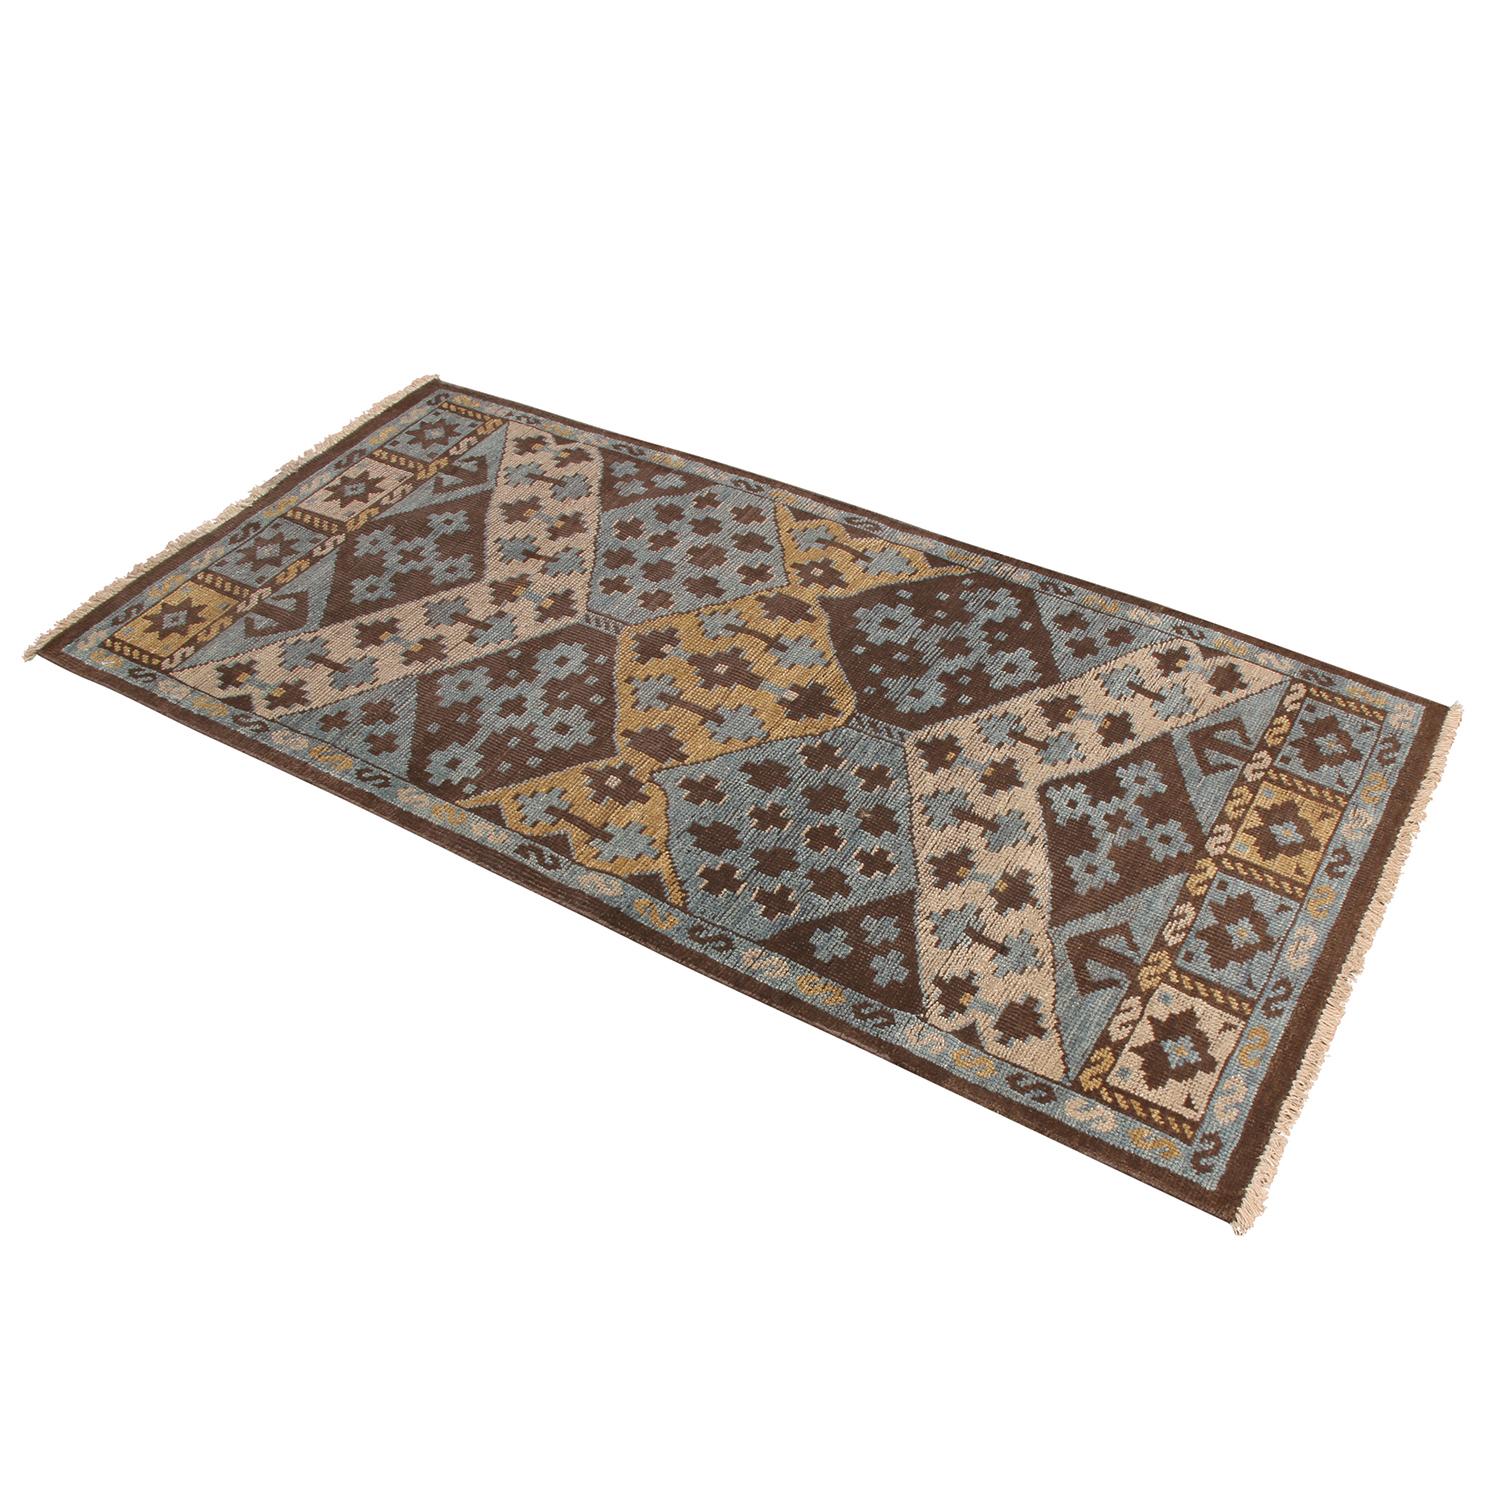 Originating from India, this hand-knotted contemporary wool rug hails from Rug & Kilim’s premier Burano collection, enjoying a unique marriage of tribal patterns with more forgiving, versatile hues of brown, beige, blue, and golden-yellow